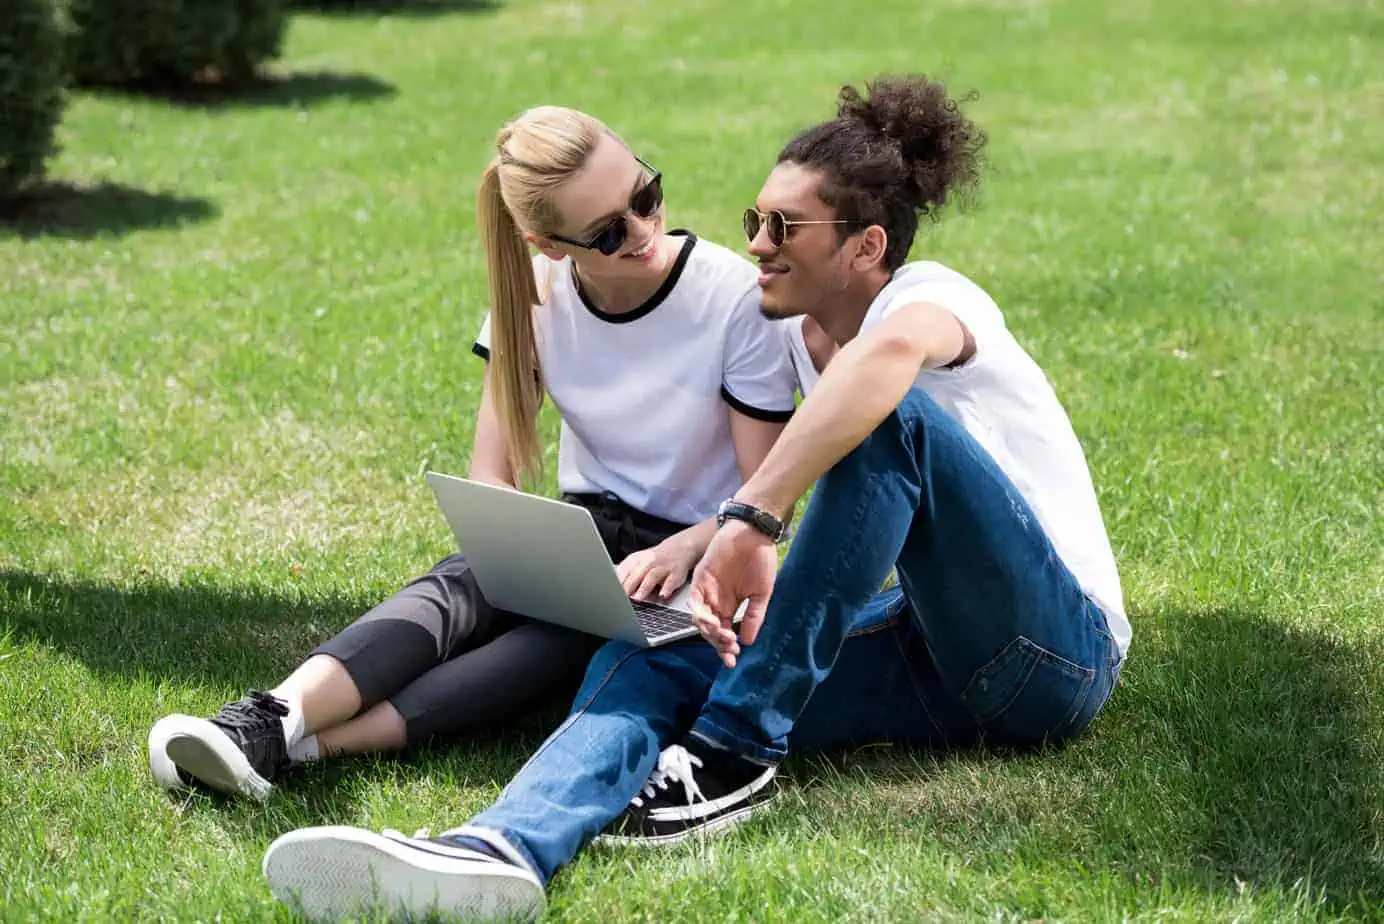 A man and woman sitting on the grass with a laptop